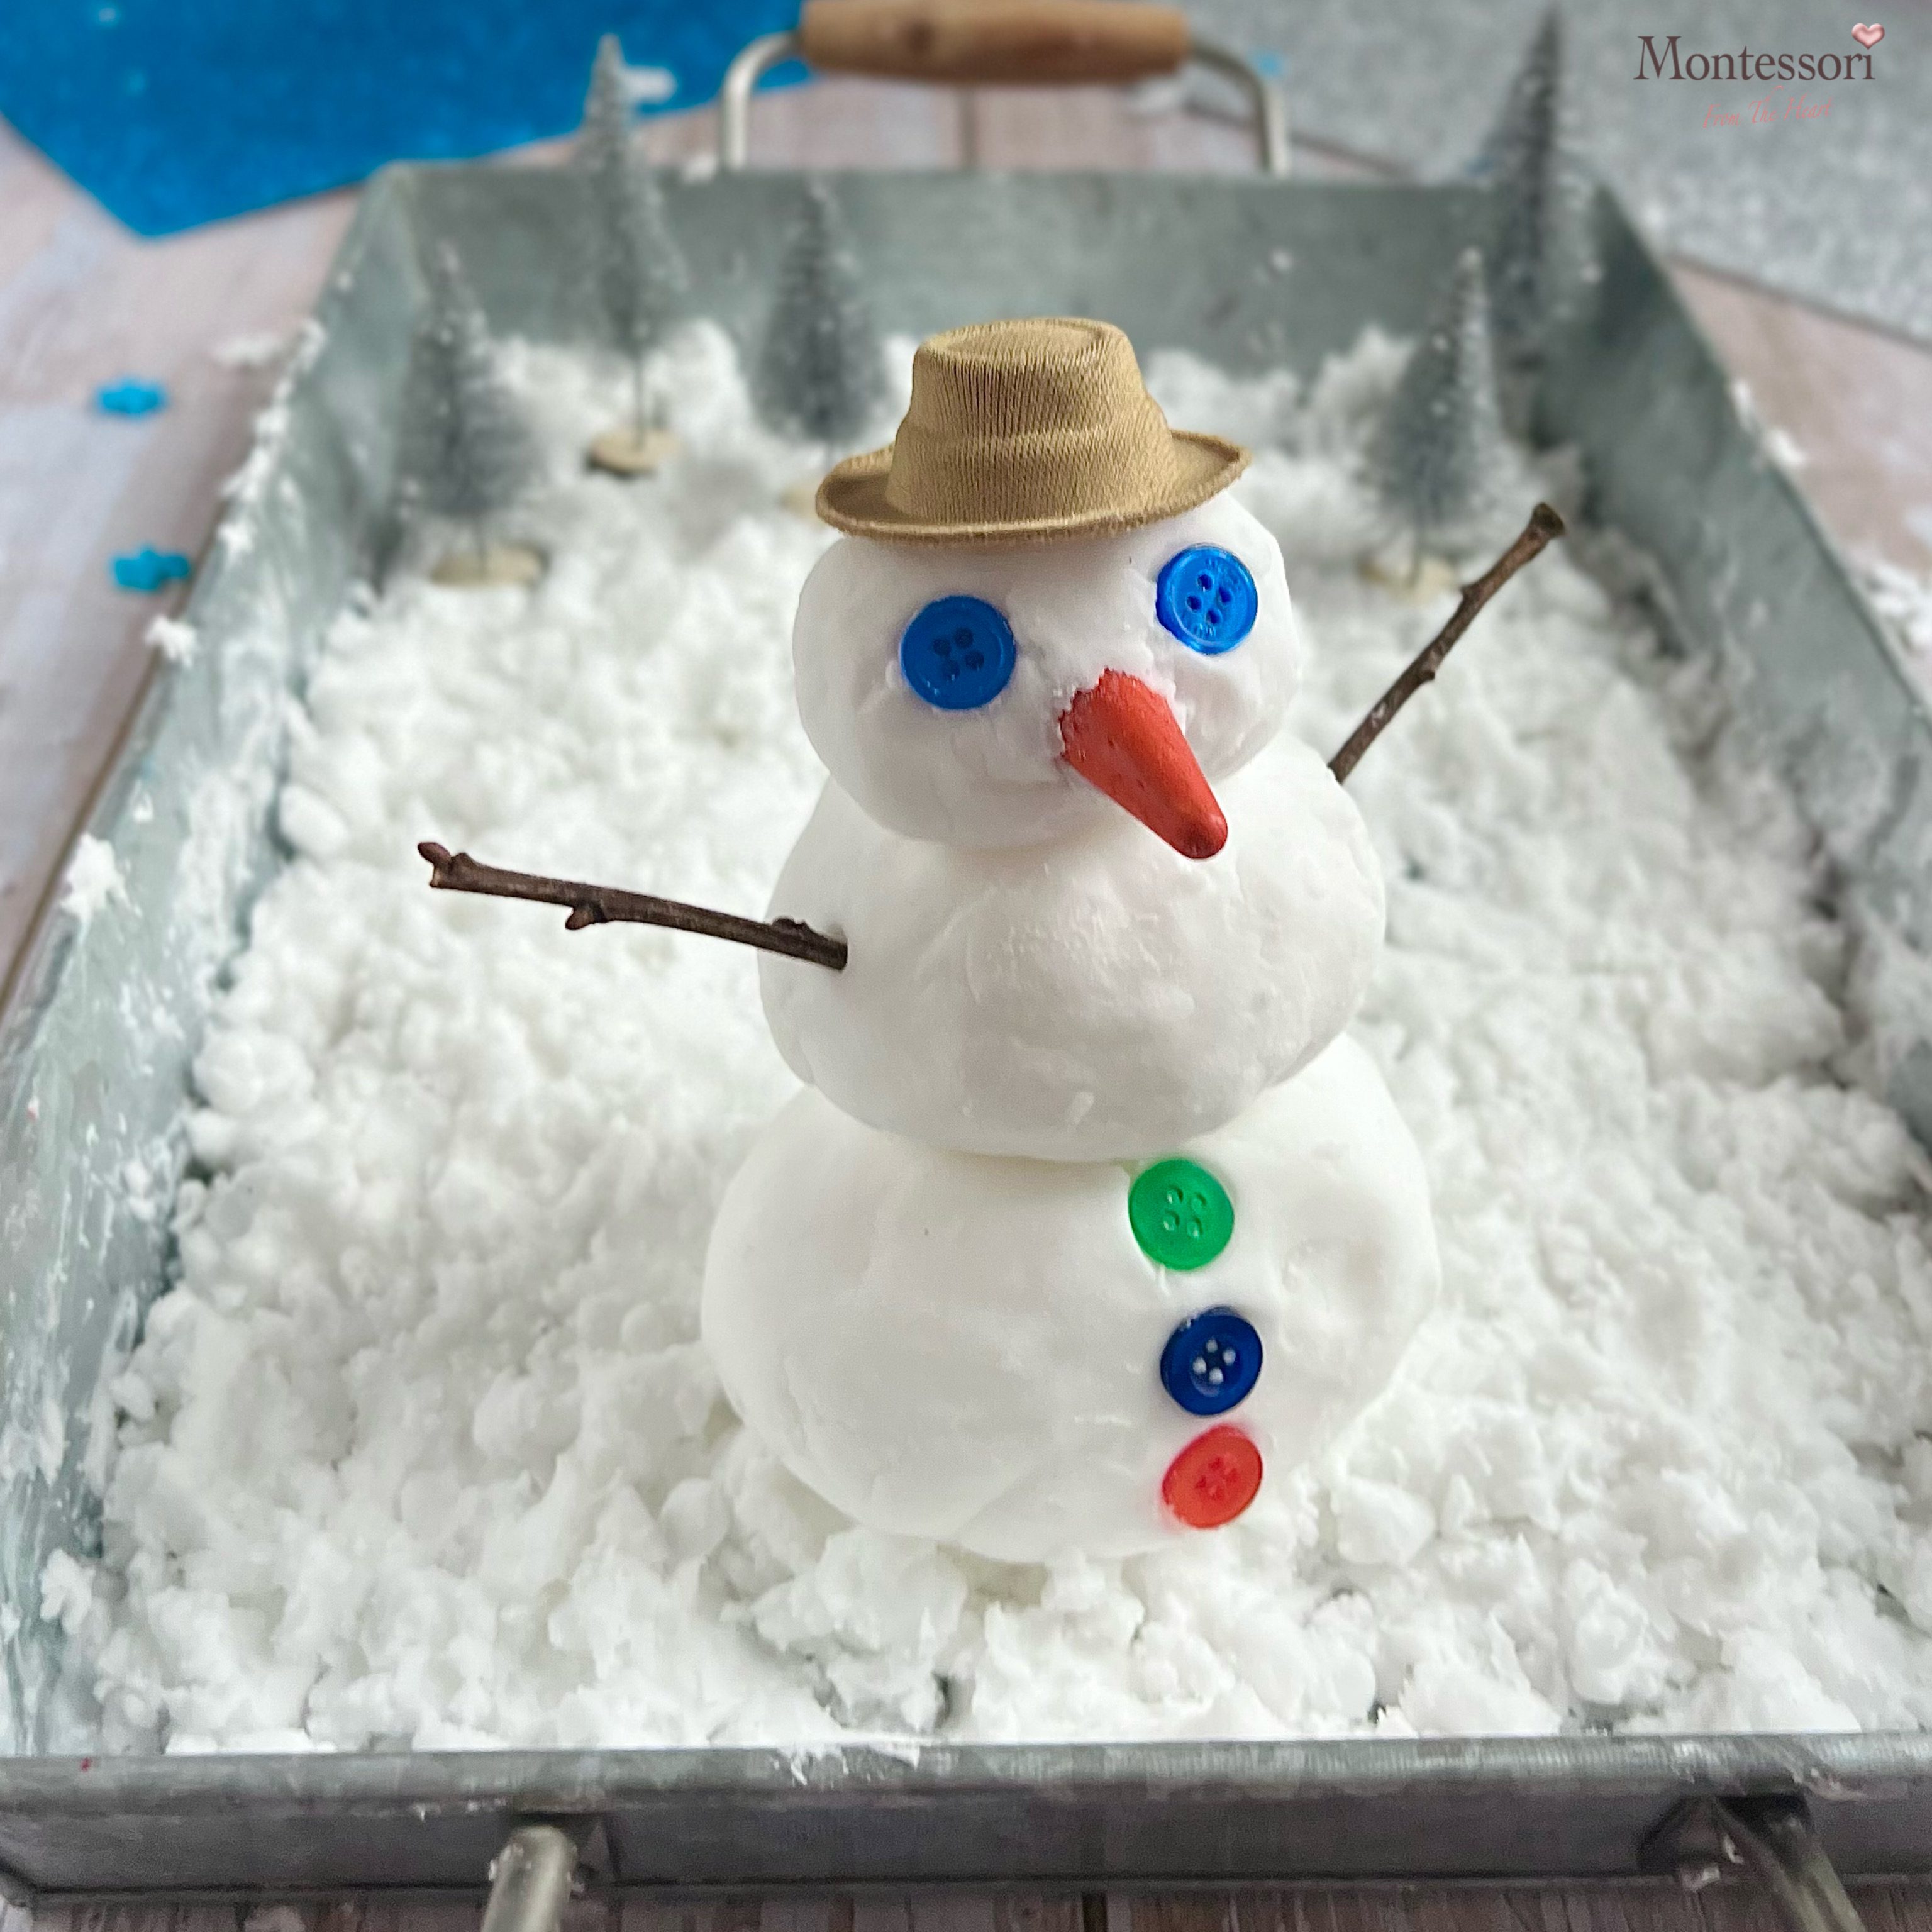 Instant Snow Polymer  Buy Polymer Snow for Classroom Projects